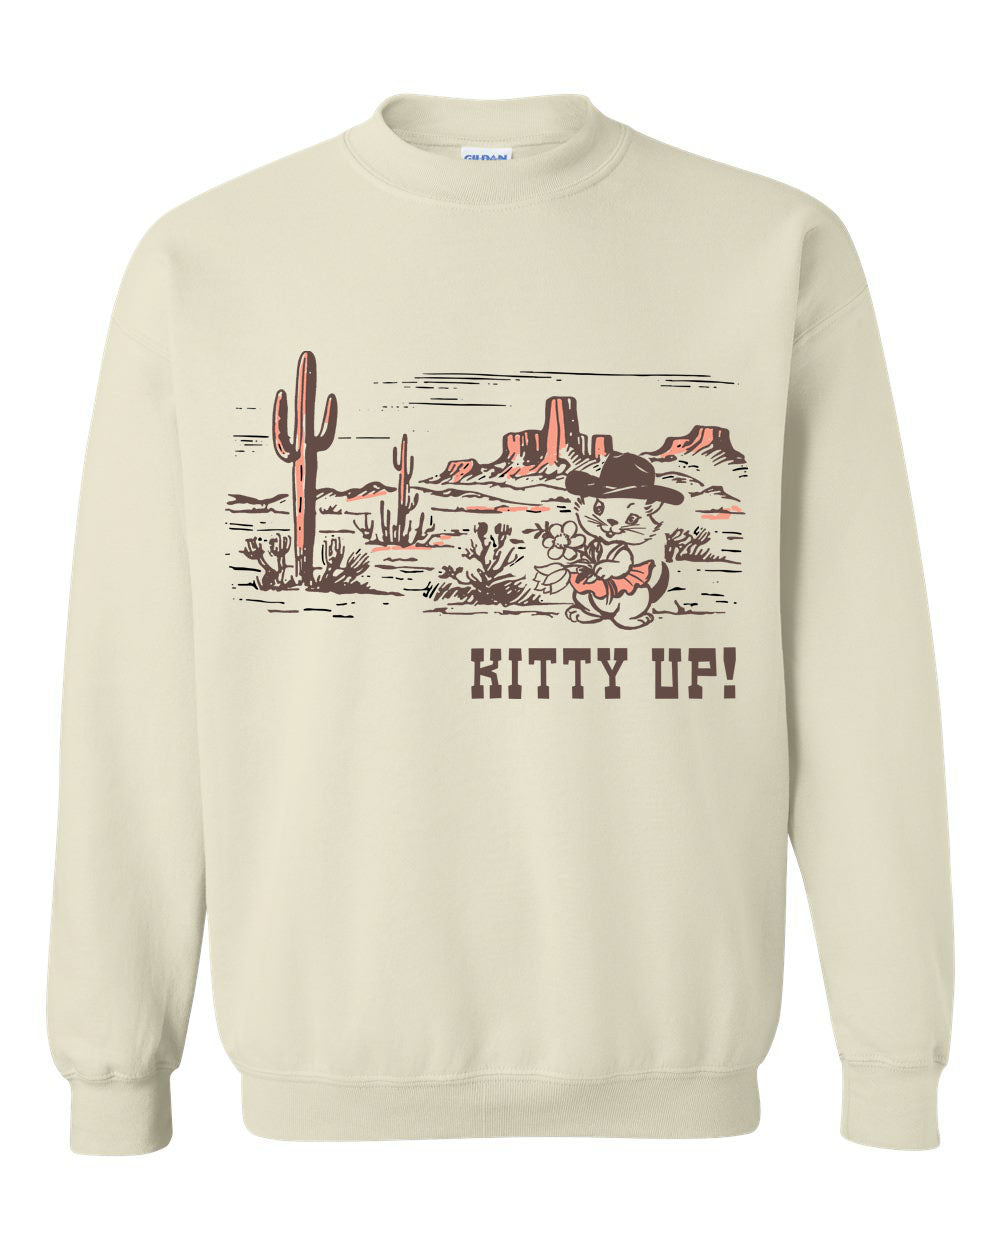 cute retro cat cowgirl western style crew neck sweatshirt funny fashion kitten cat mom gift shirt cactus desert shirts coin laundry funny style